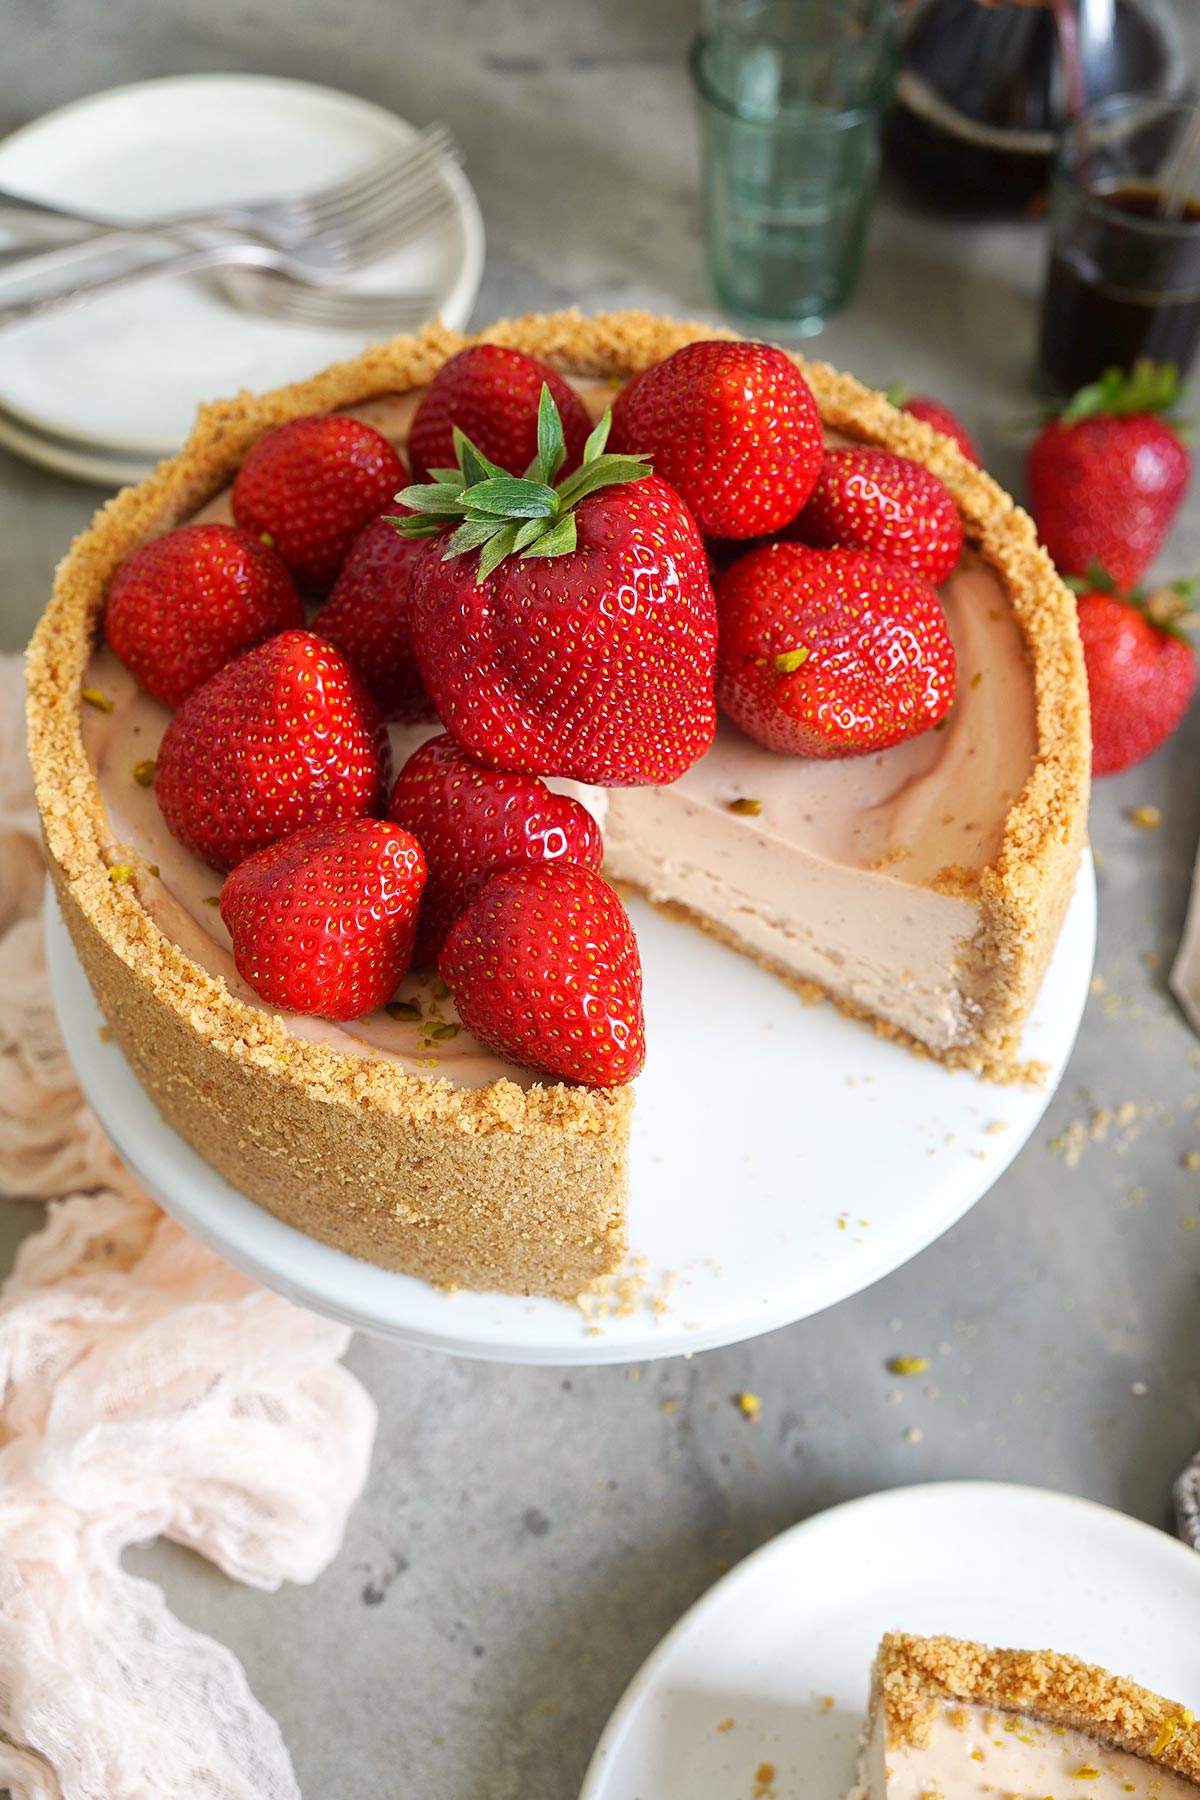 Baked Strawberry Cheesecake | Bake to the roots